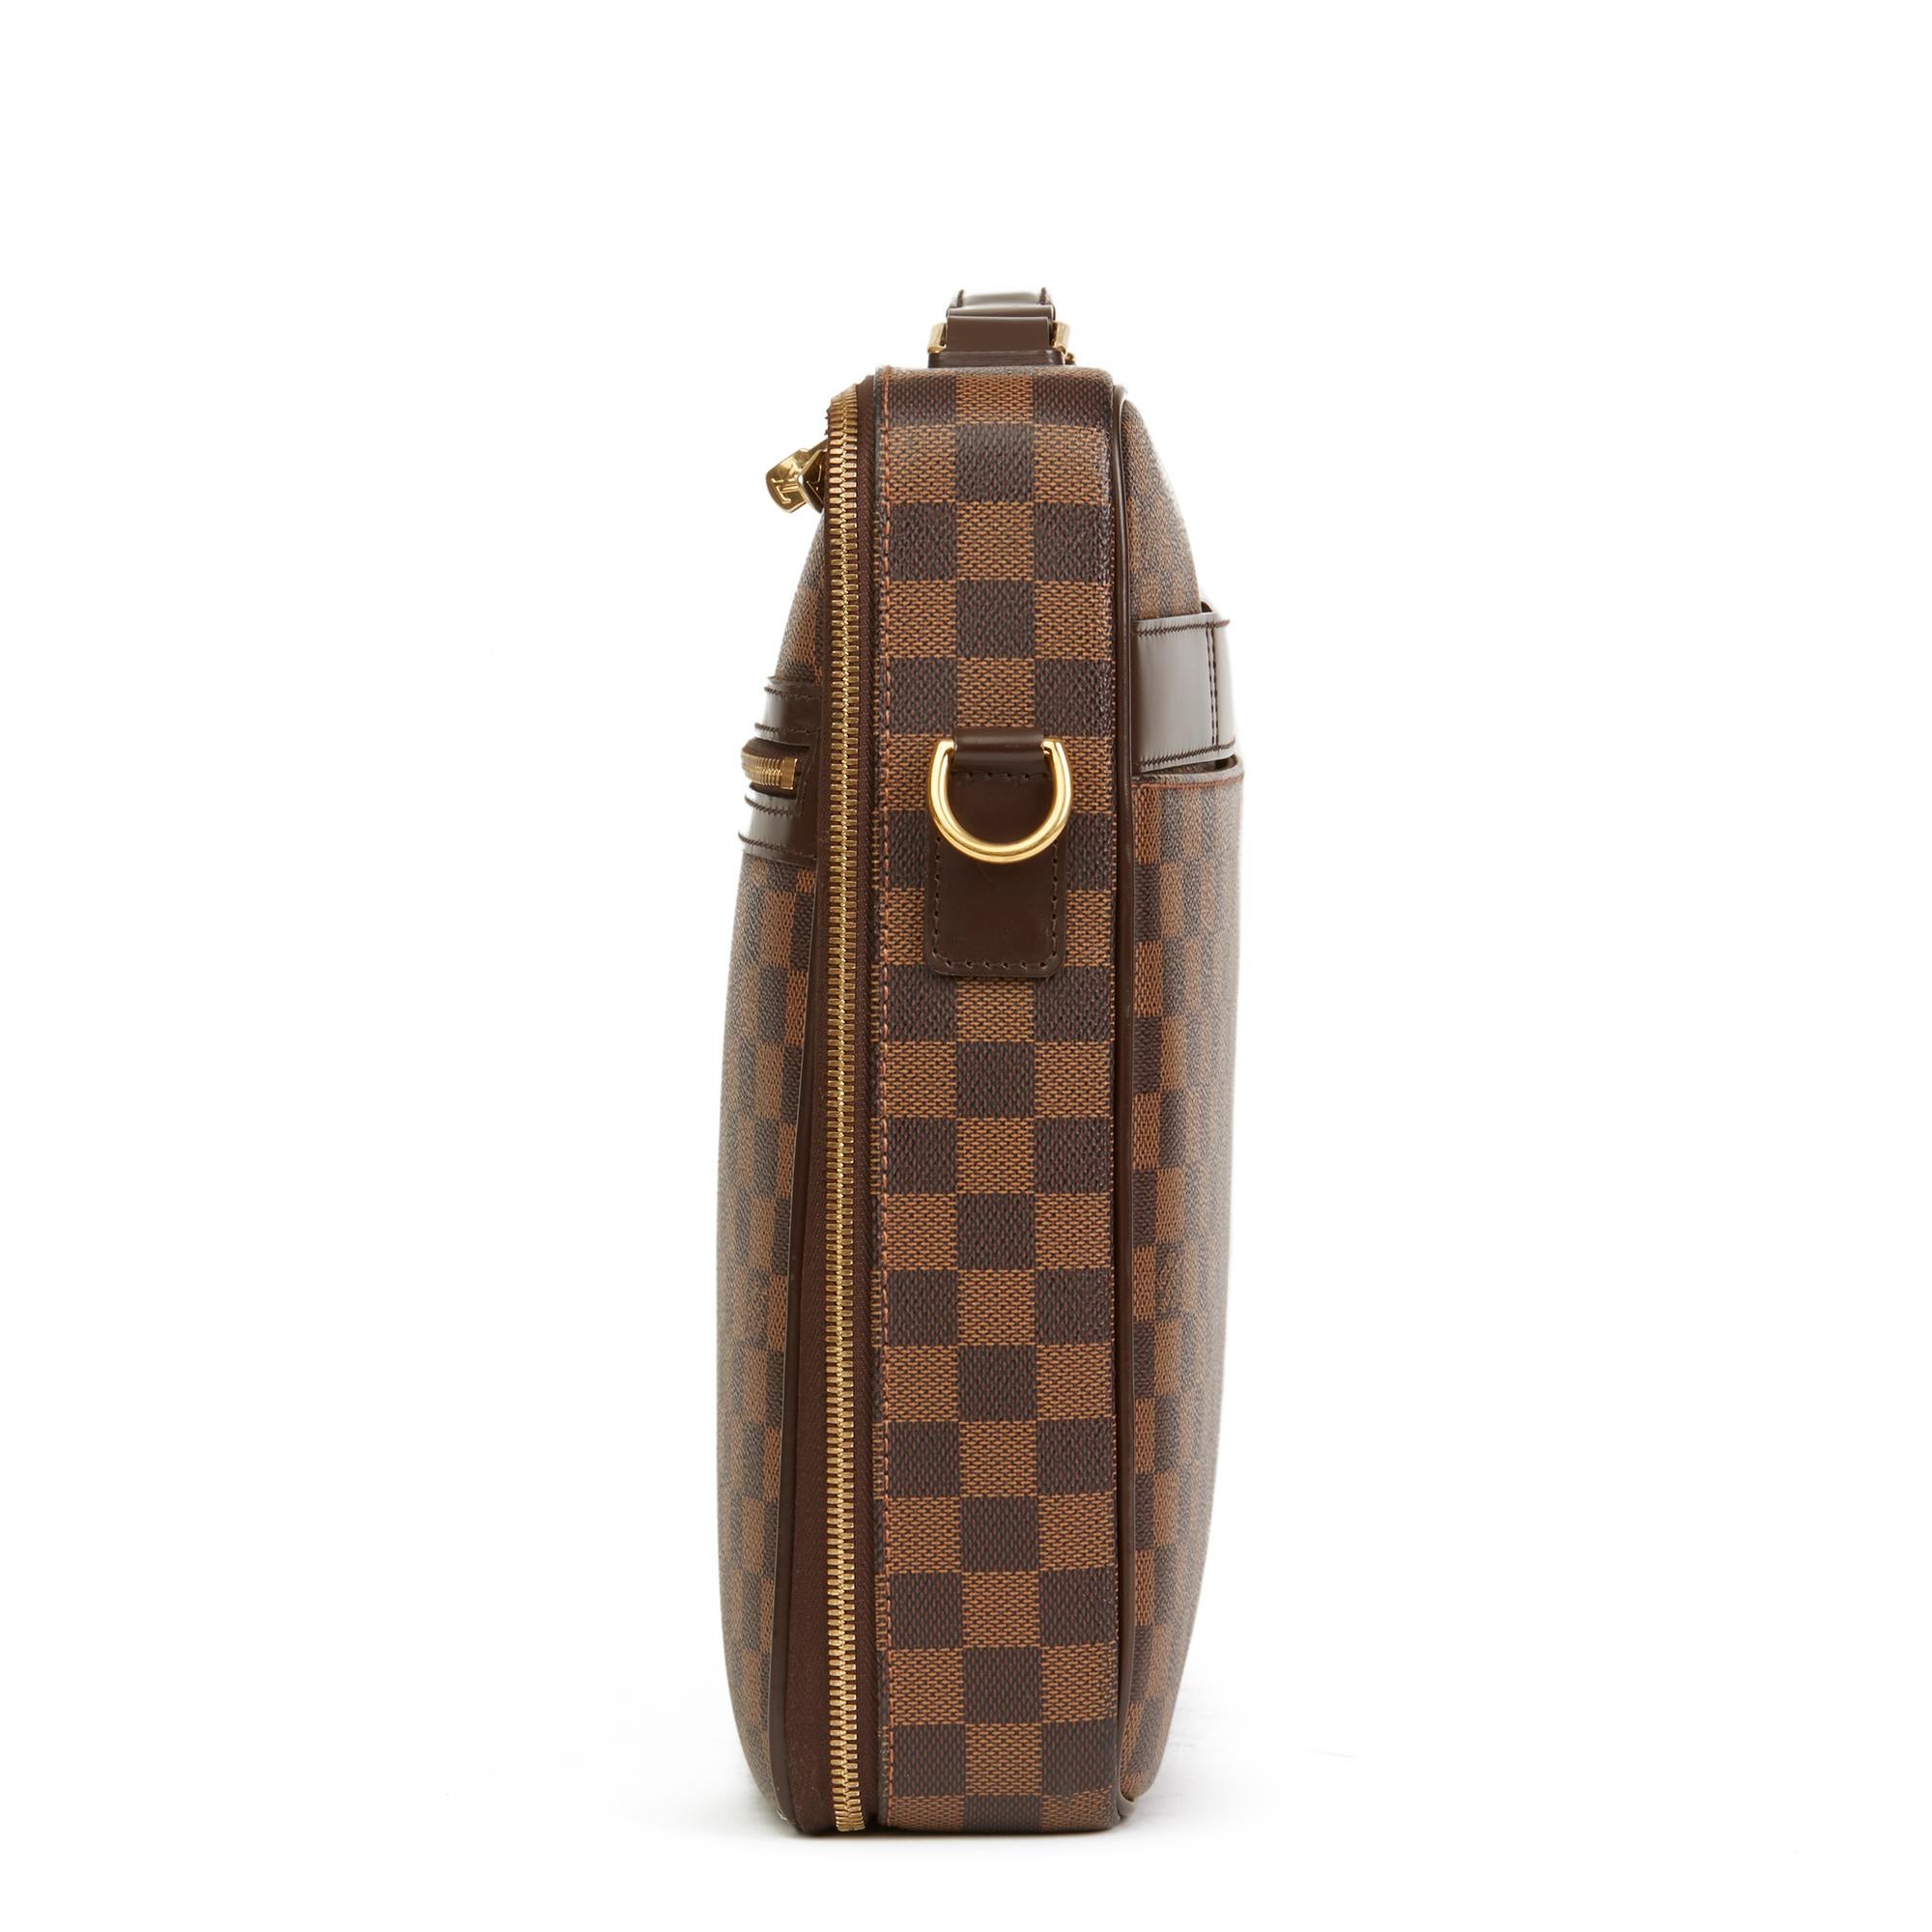 LOUIS VUITTON
Brown Damier Ebene Coated Canvas Sabana Computer Case

Reference: HB2548
Serial Number: MB4101
Age (Circa): 2011
Accompanied By: Shoulder Strap, Padlock, Keys
Authenticity Details: Date Stamp (Made in France)
Gender: Unisex
Type: